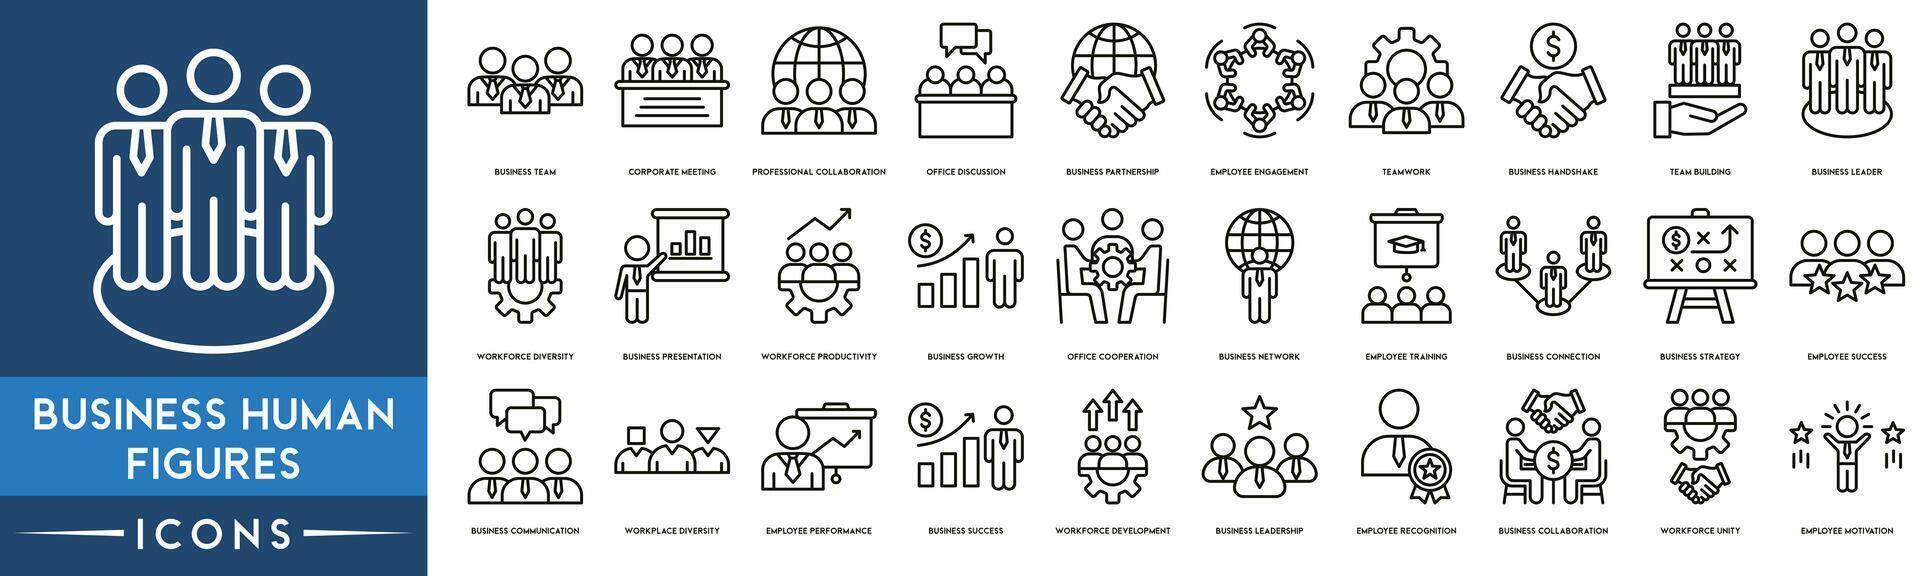 Business Human Figures Outline Icon Collection. Business Team, Meeting, Collaboration, Discussion, Partnership, Engagement, Teamwork, Team Building and Business Growth vector